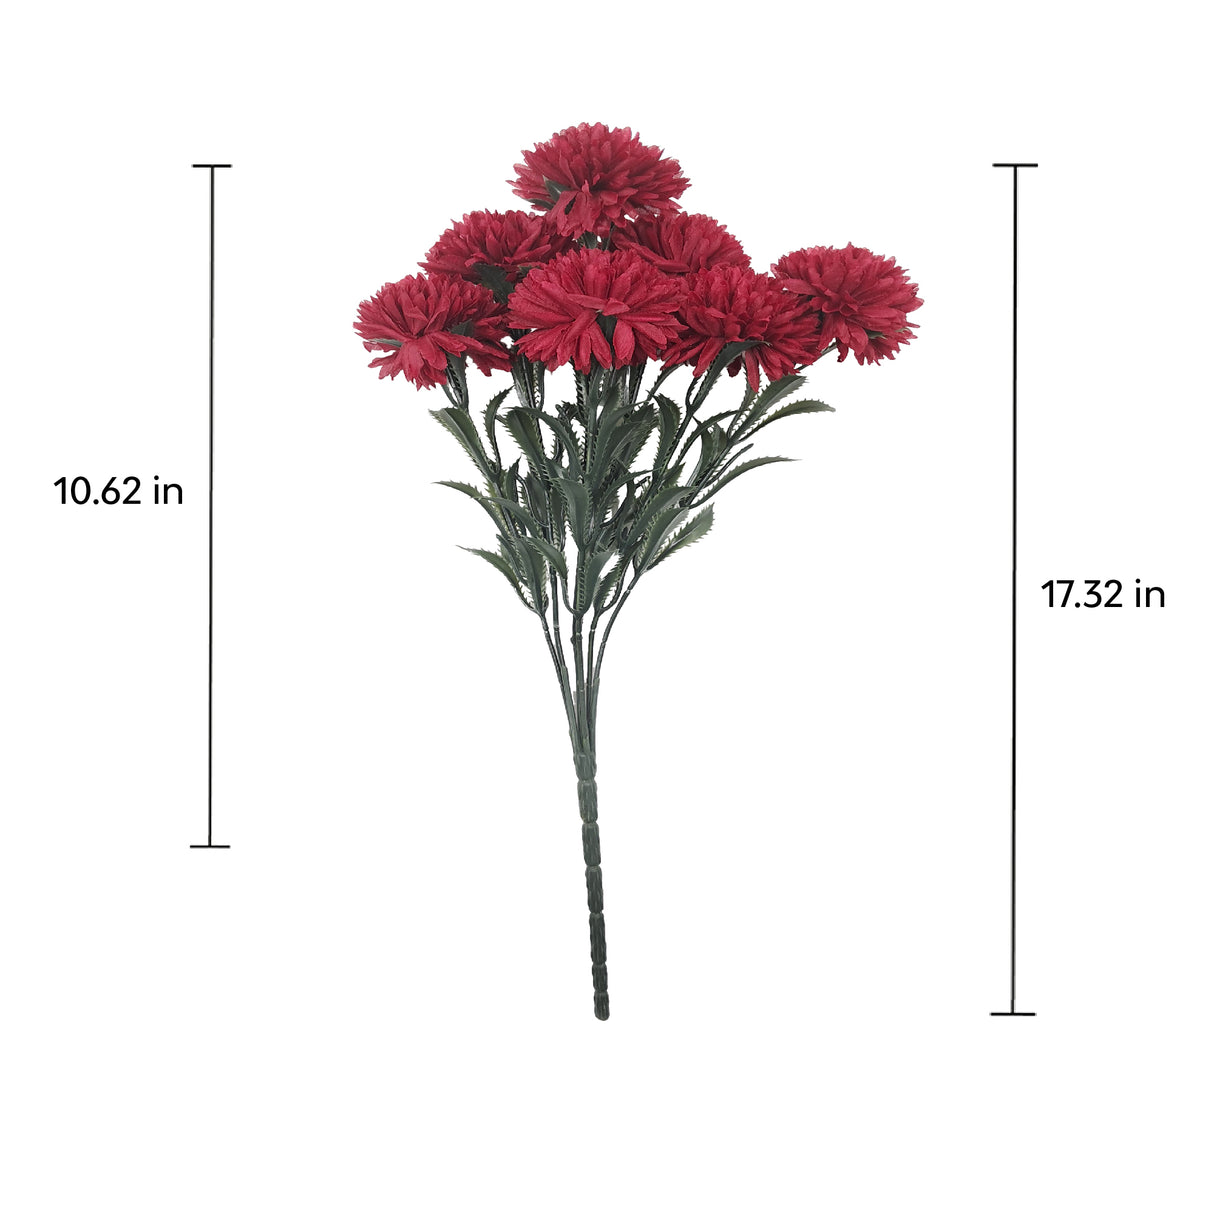 Artificial Carnations Flowers